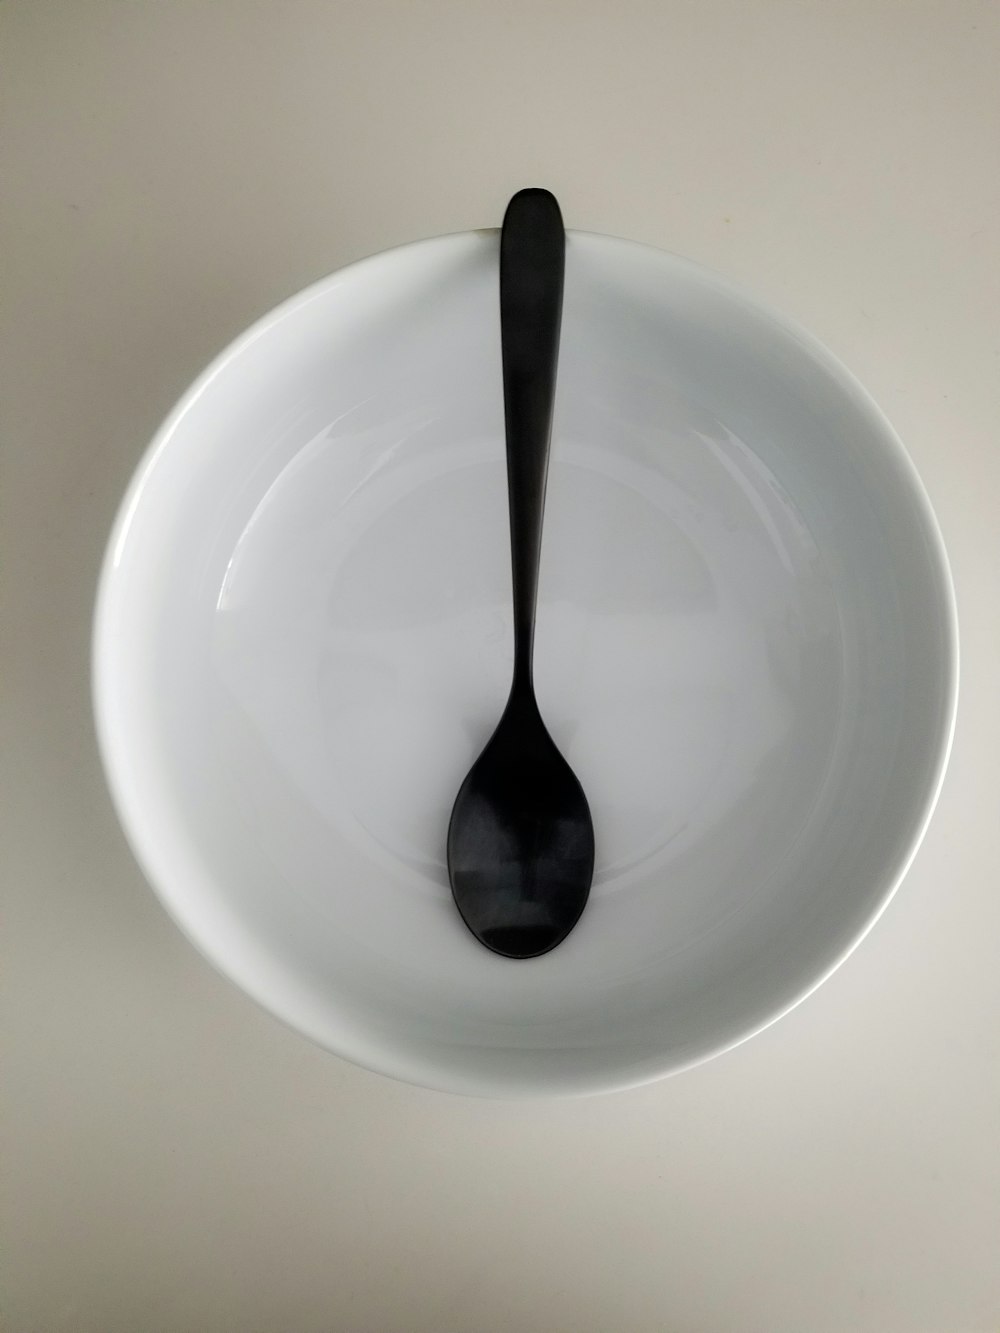 stainless steel spoon on white ceramic plate